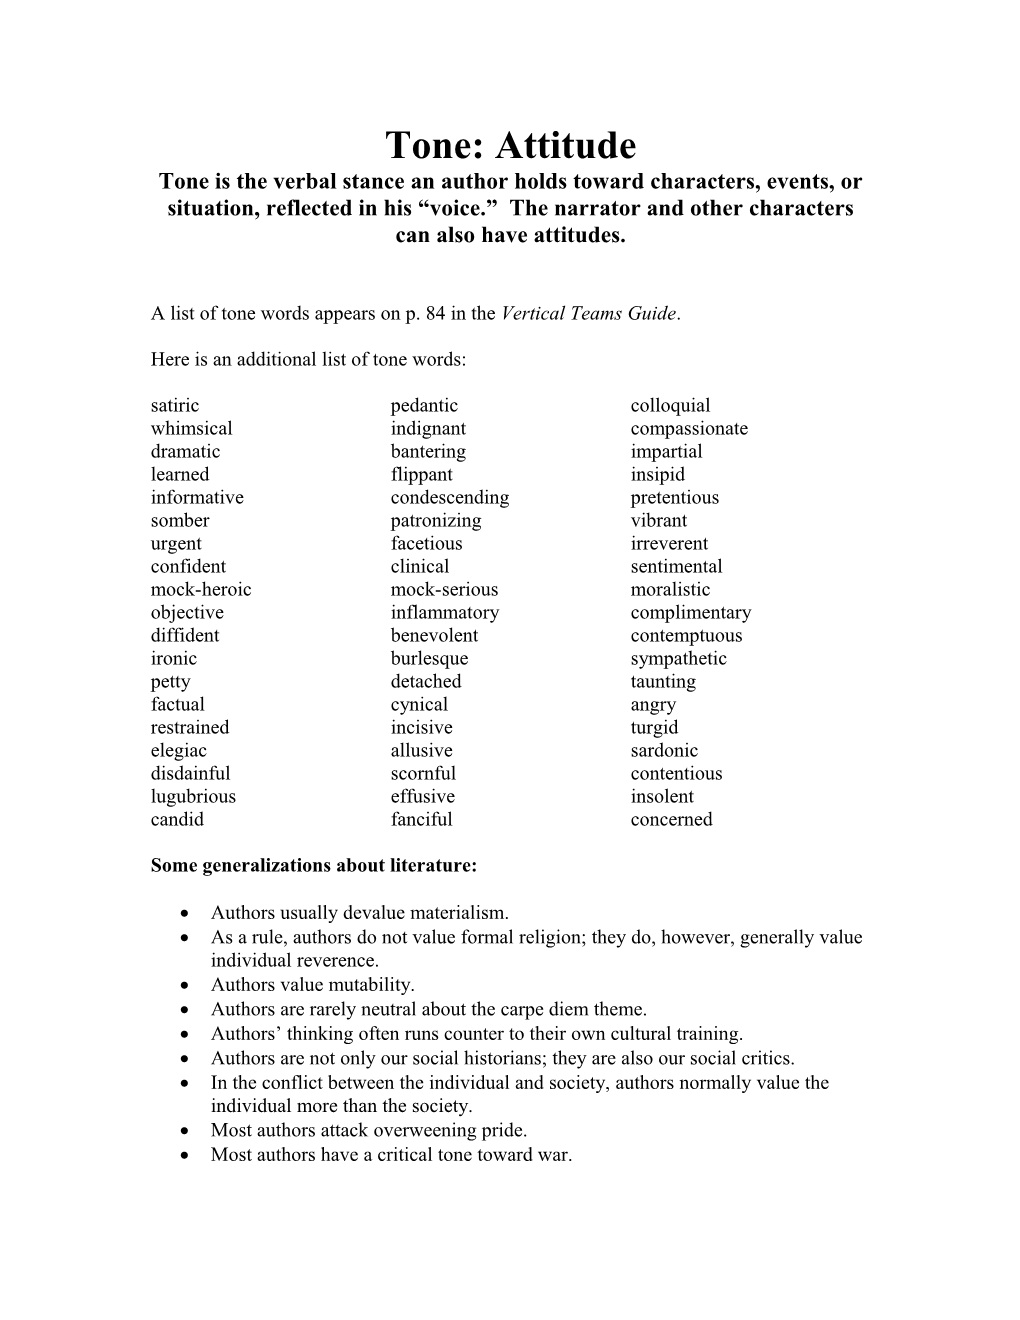 A List of Tone Words Appears on P. 84 in the Vertical Teams Guide